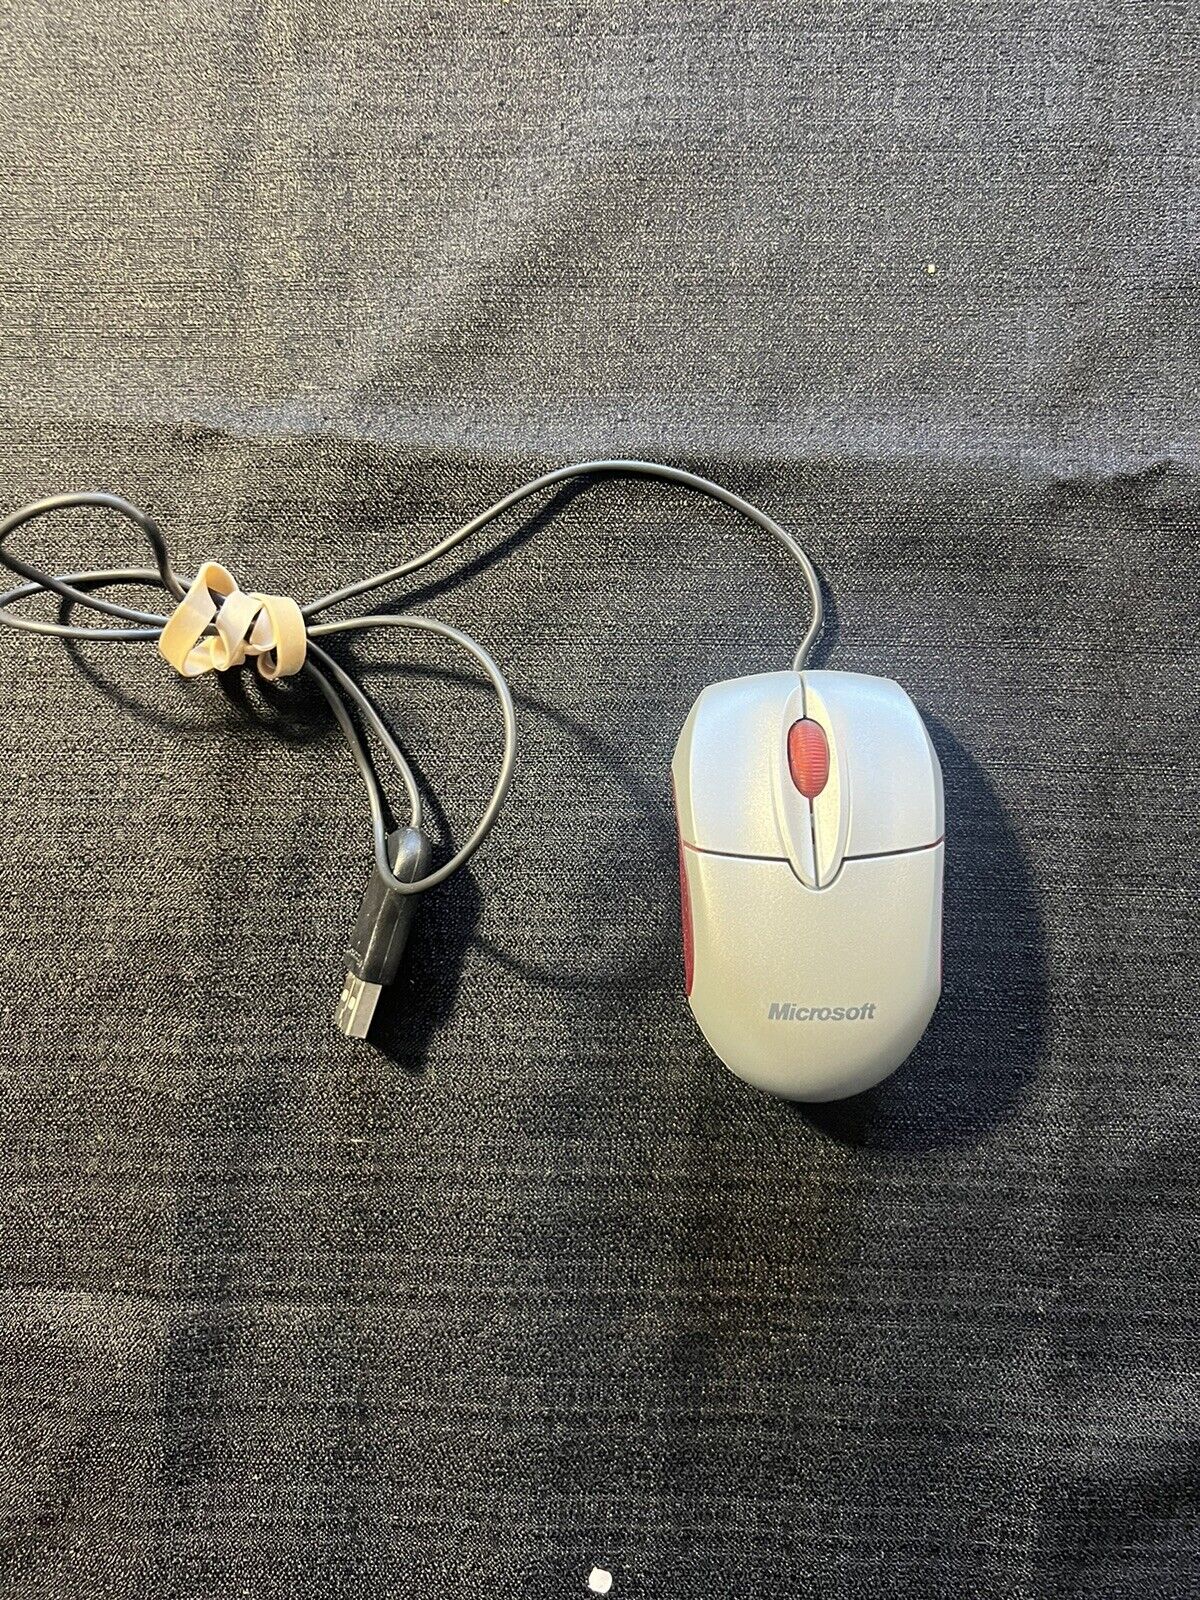 Microsoft 1020 Notebook Optical Mouse USB EUC Tested - Works Great Ships FREE